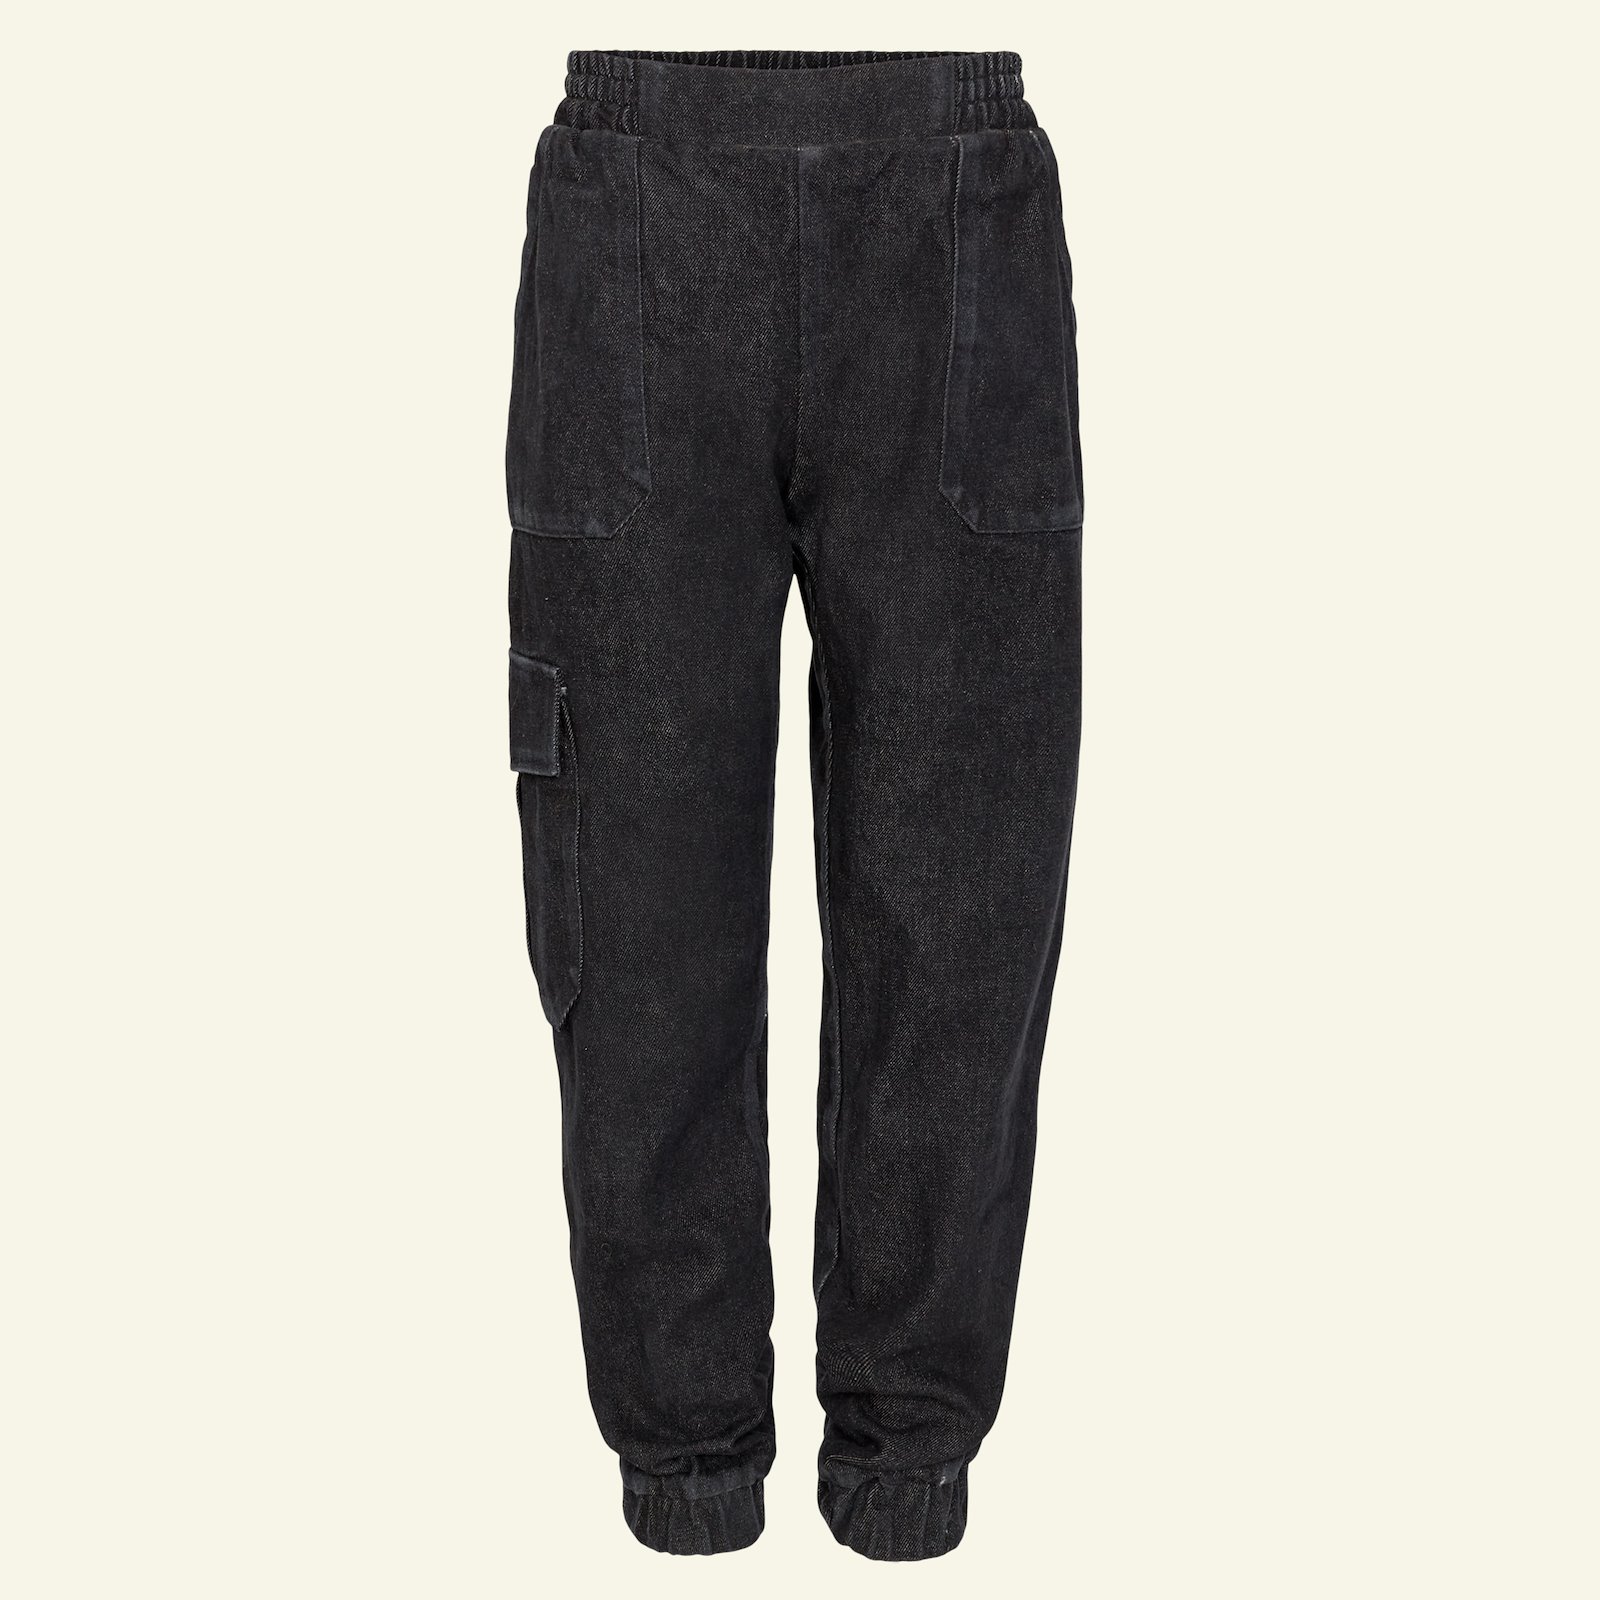 Cargo trousers, 134/9y p60037_5343_sskit